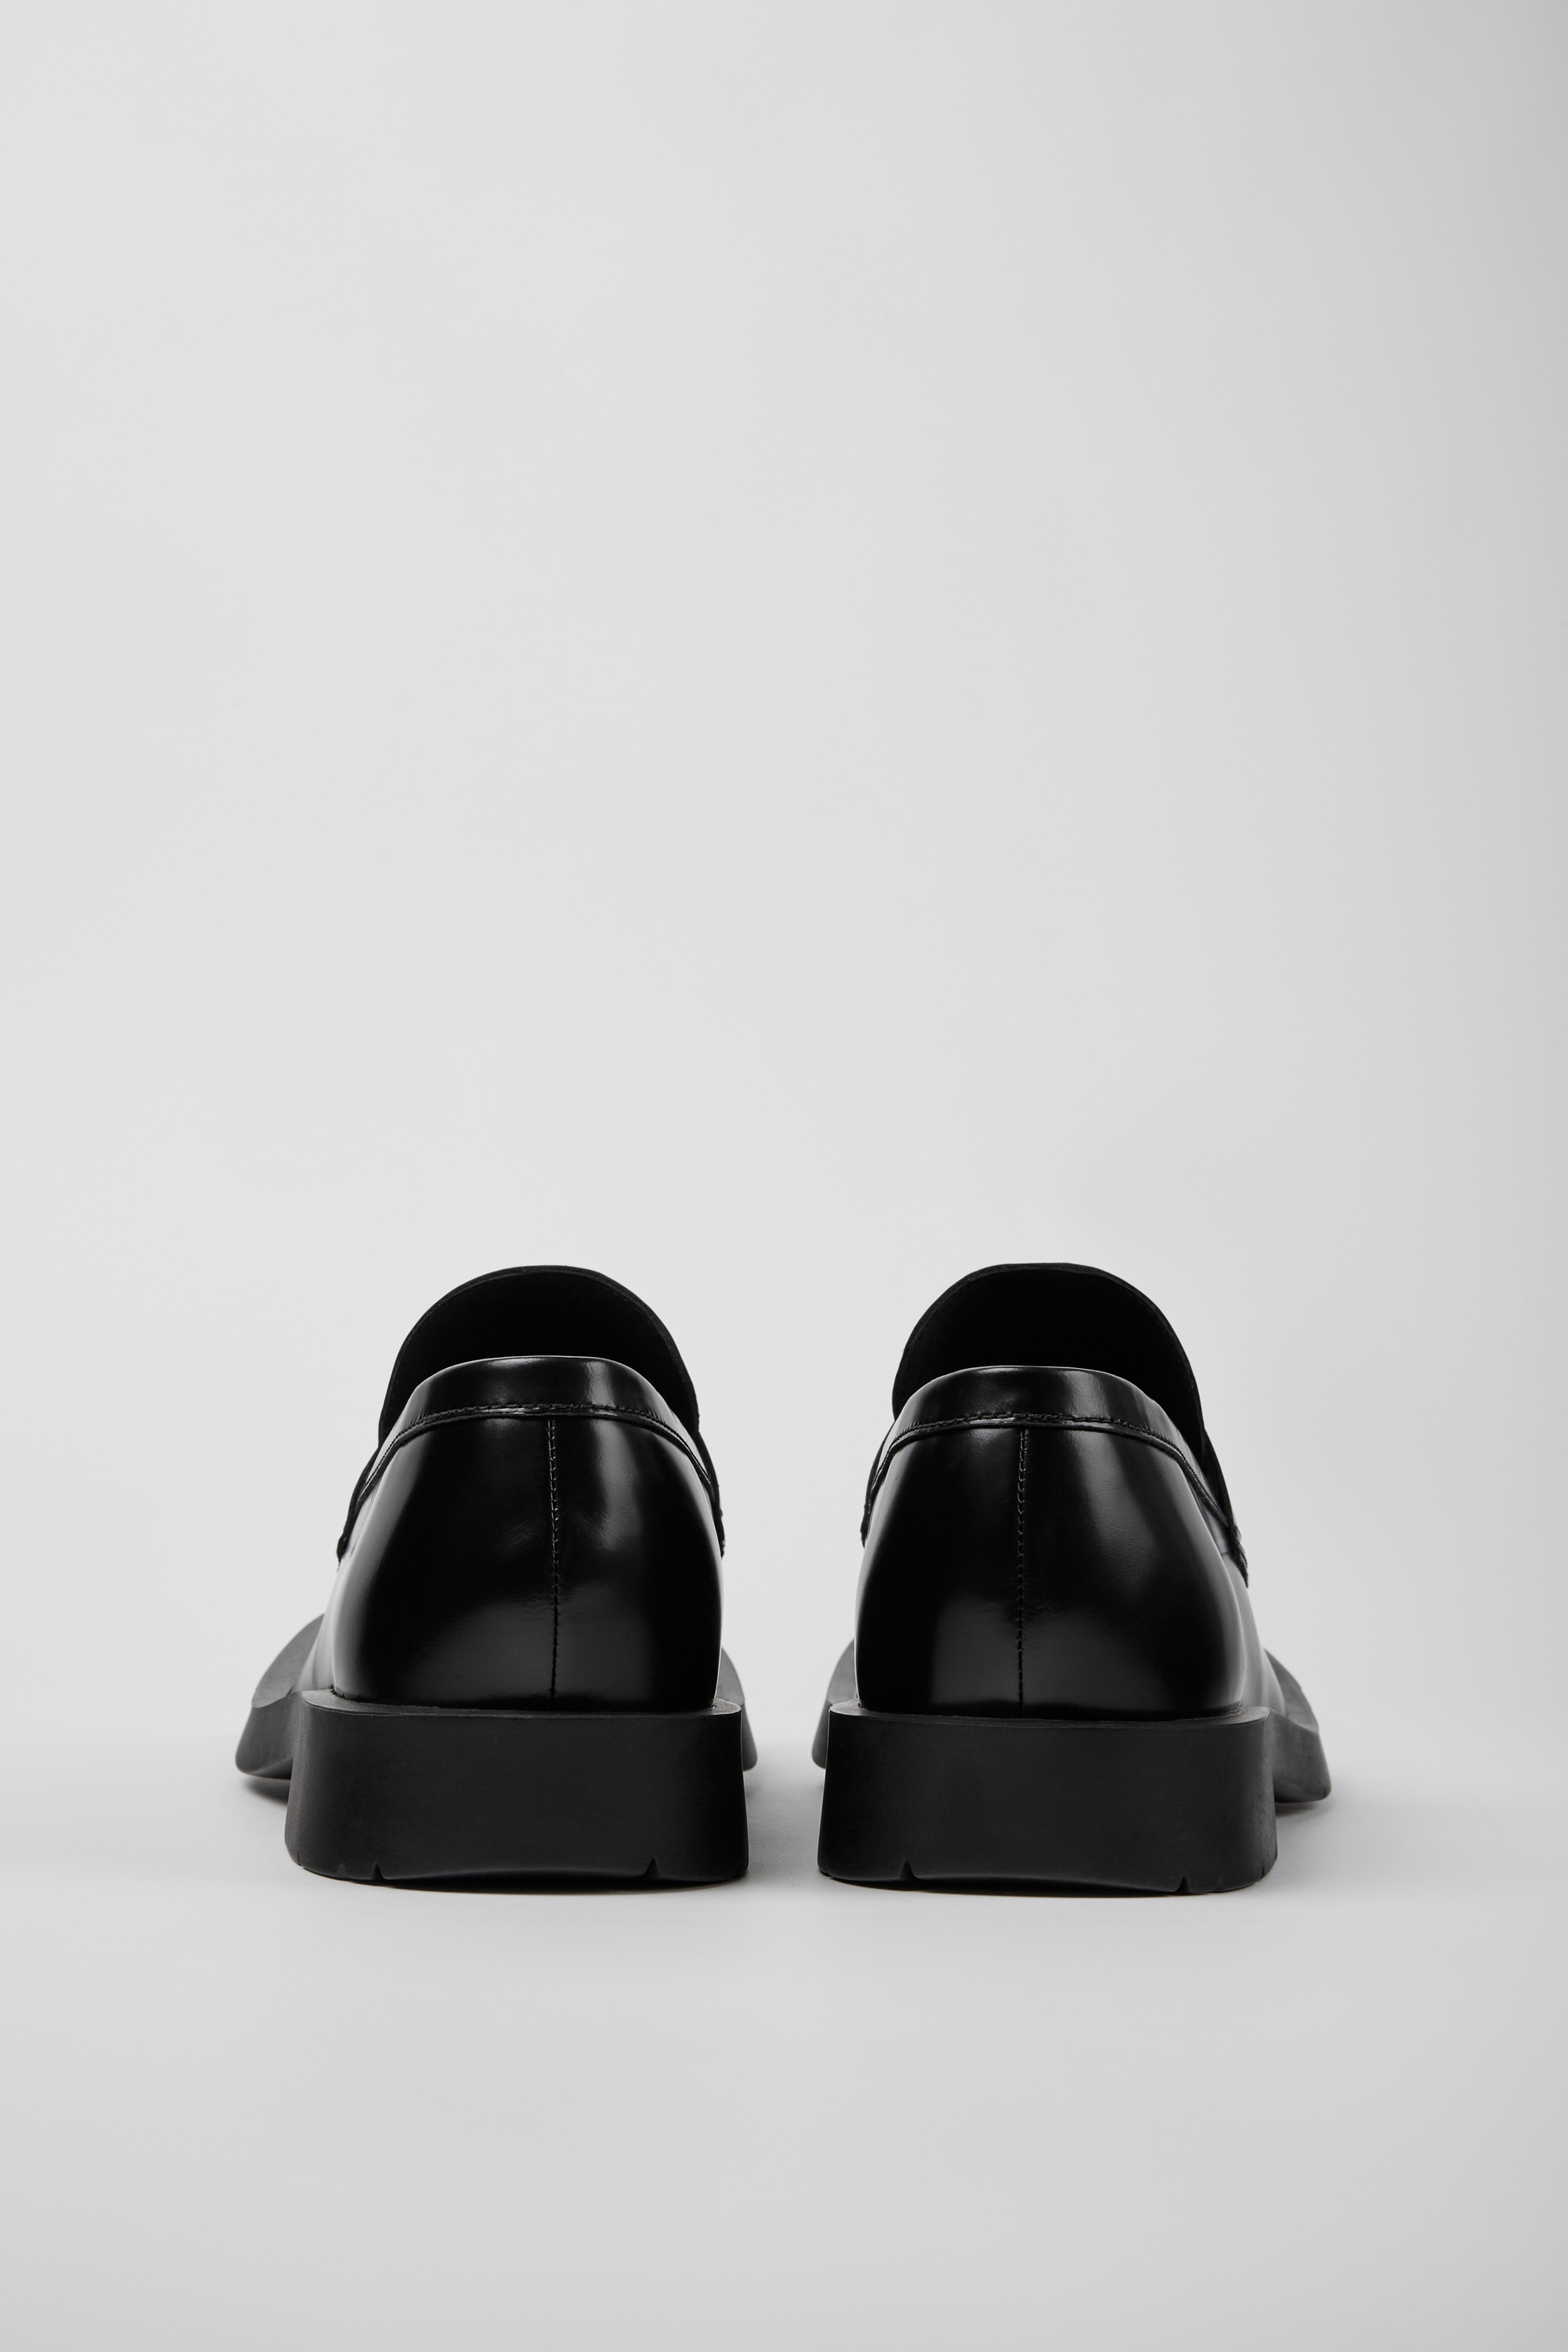 Neuman Black Loafers for Unisex - Fall/Winter collection - Camper